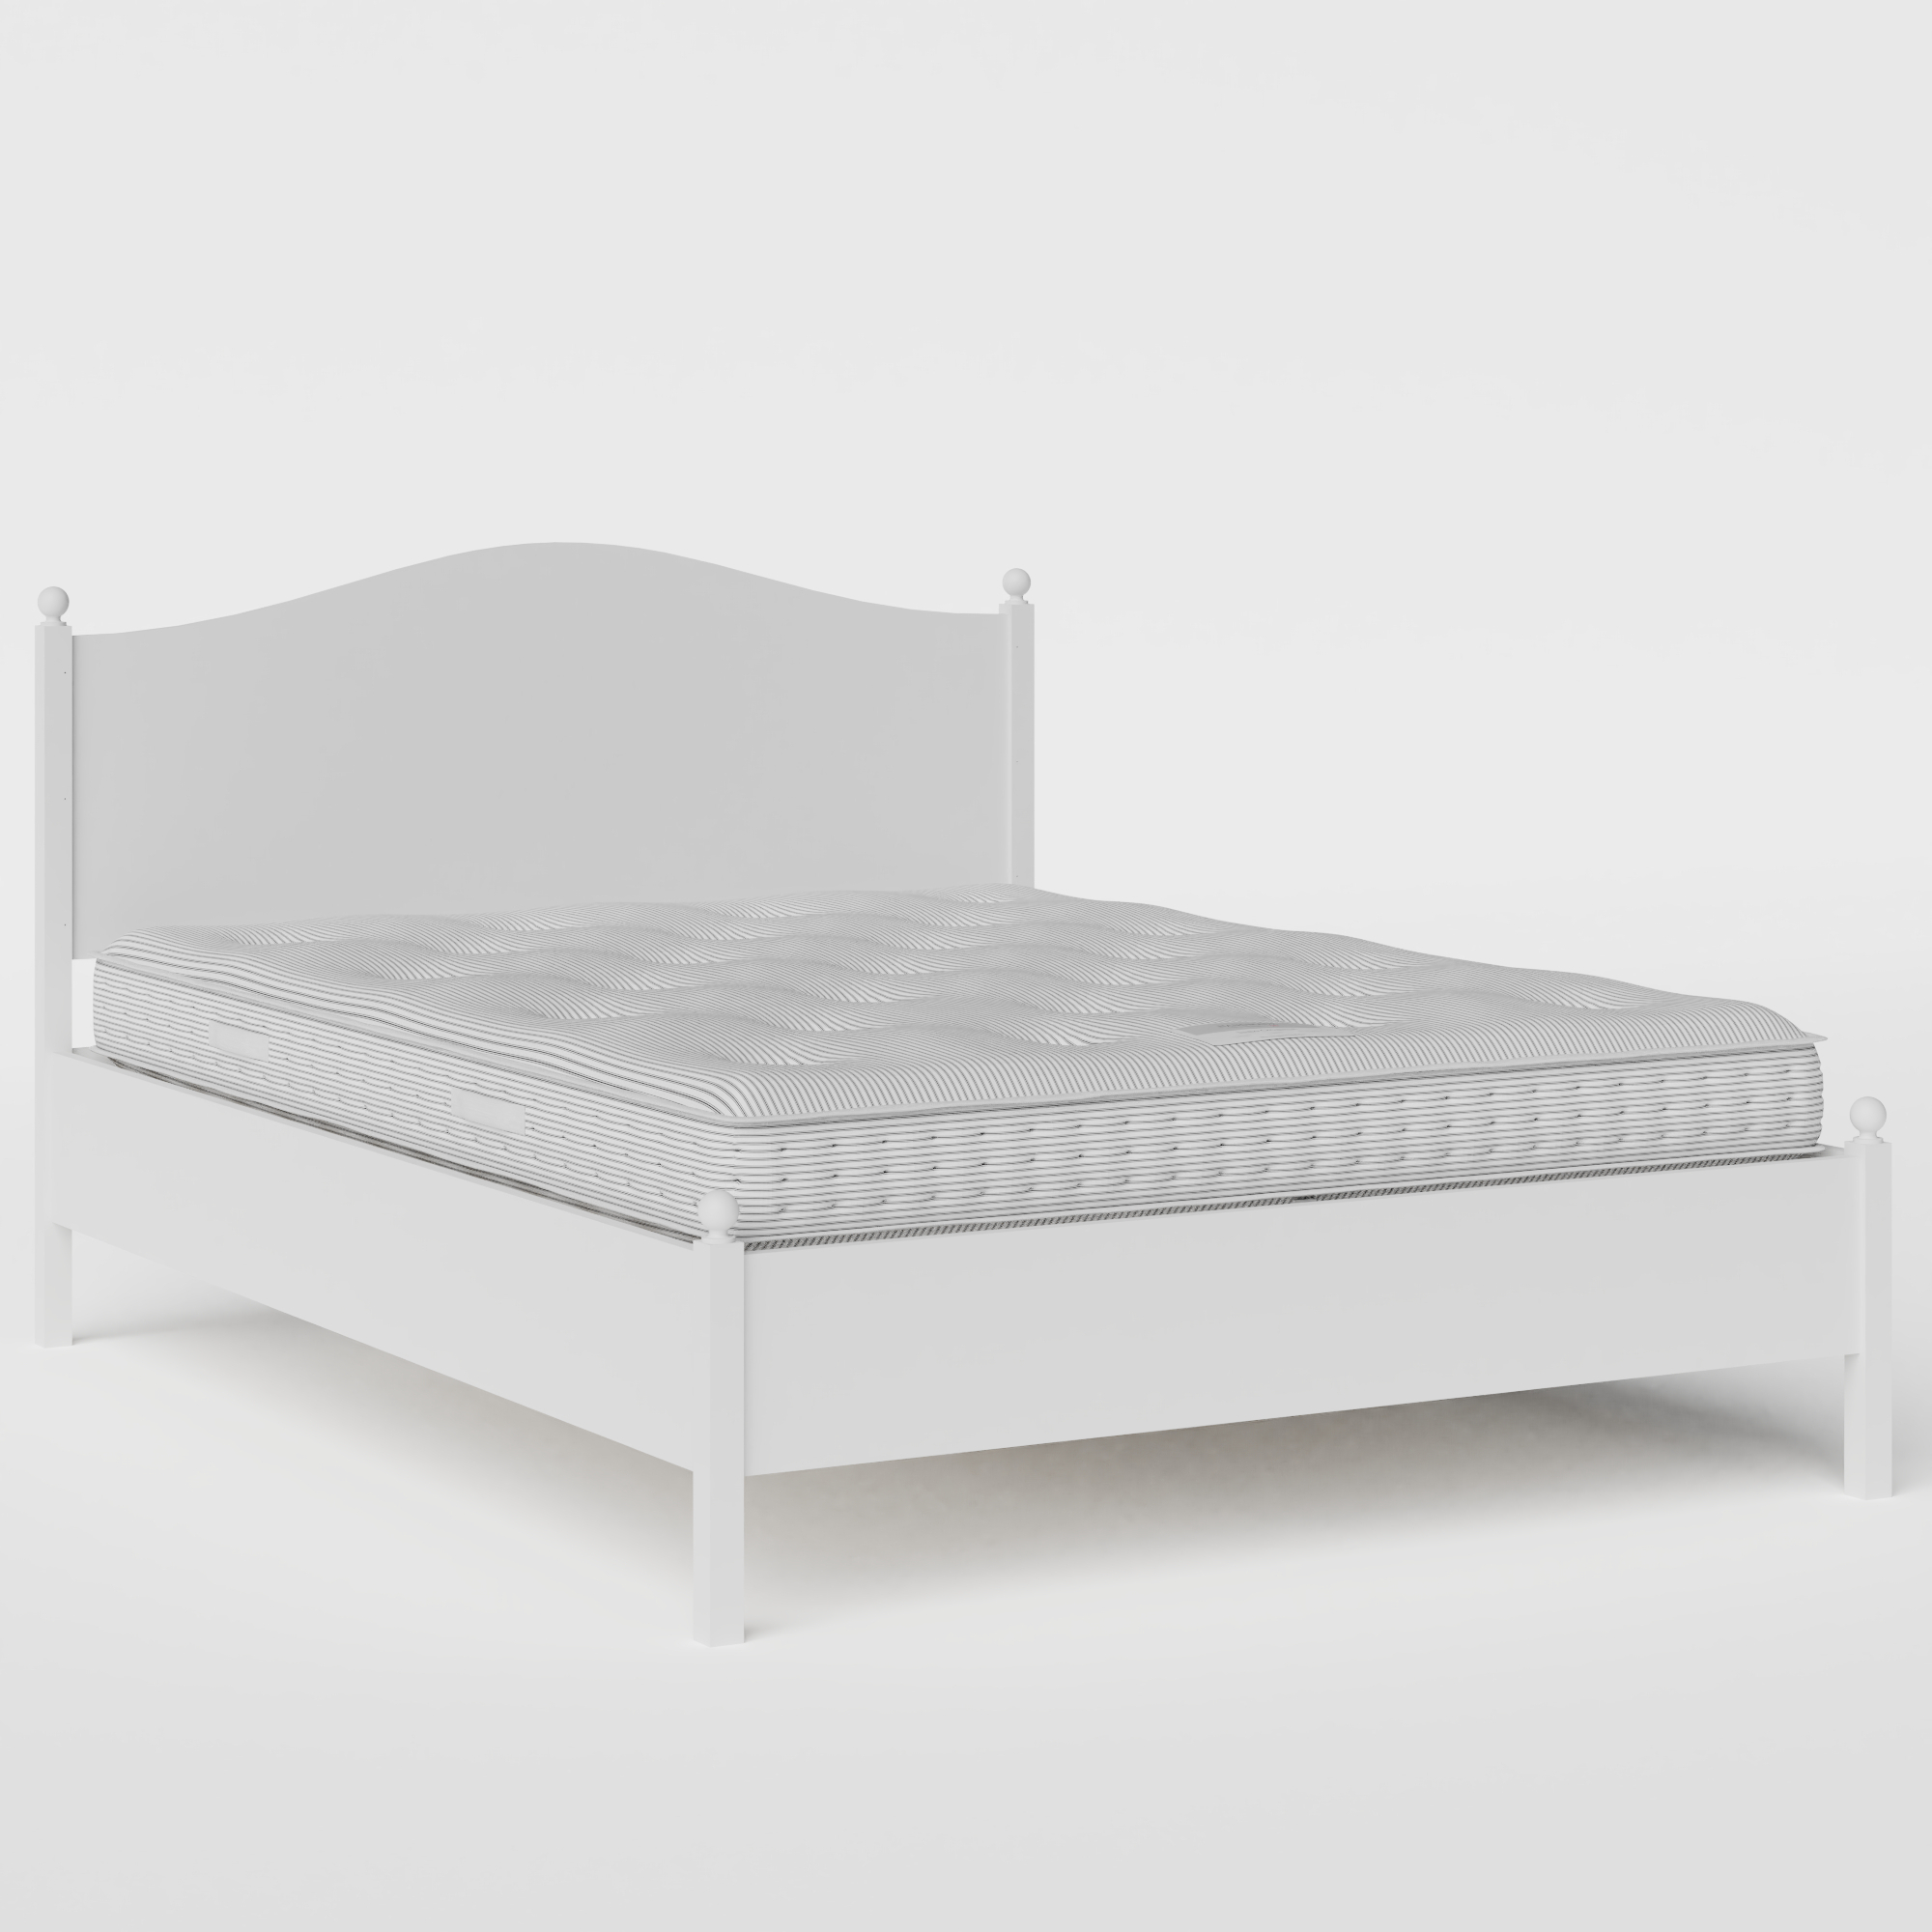 Brady Painted painted wood bed in white with Juno mattress